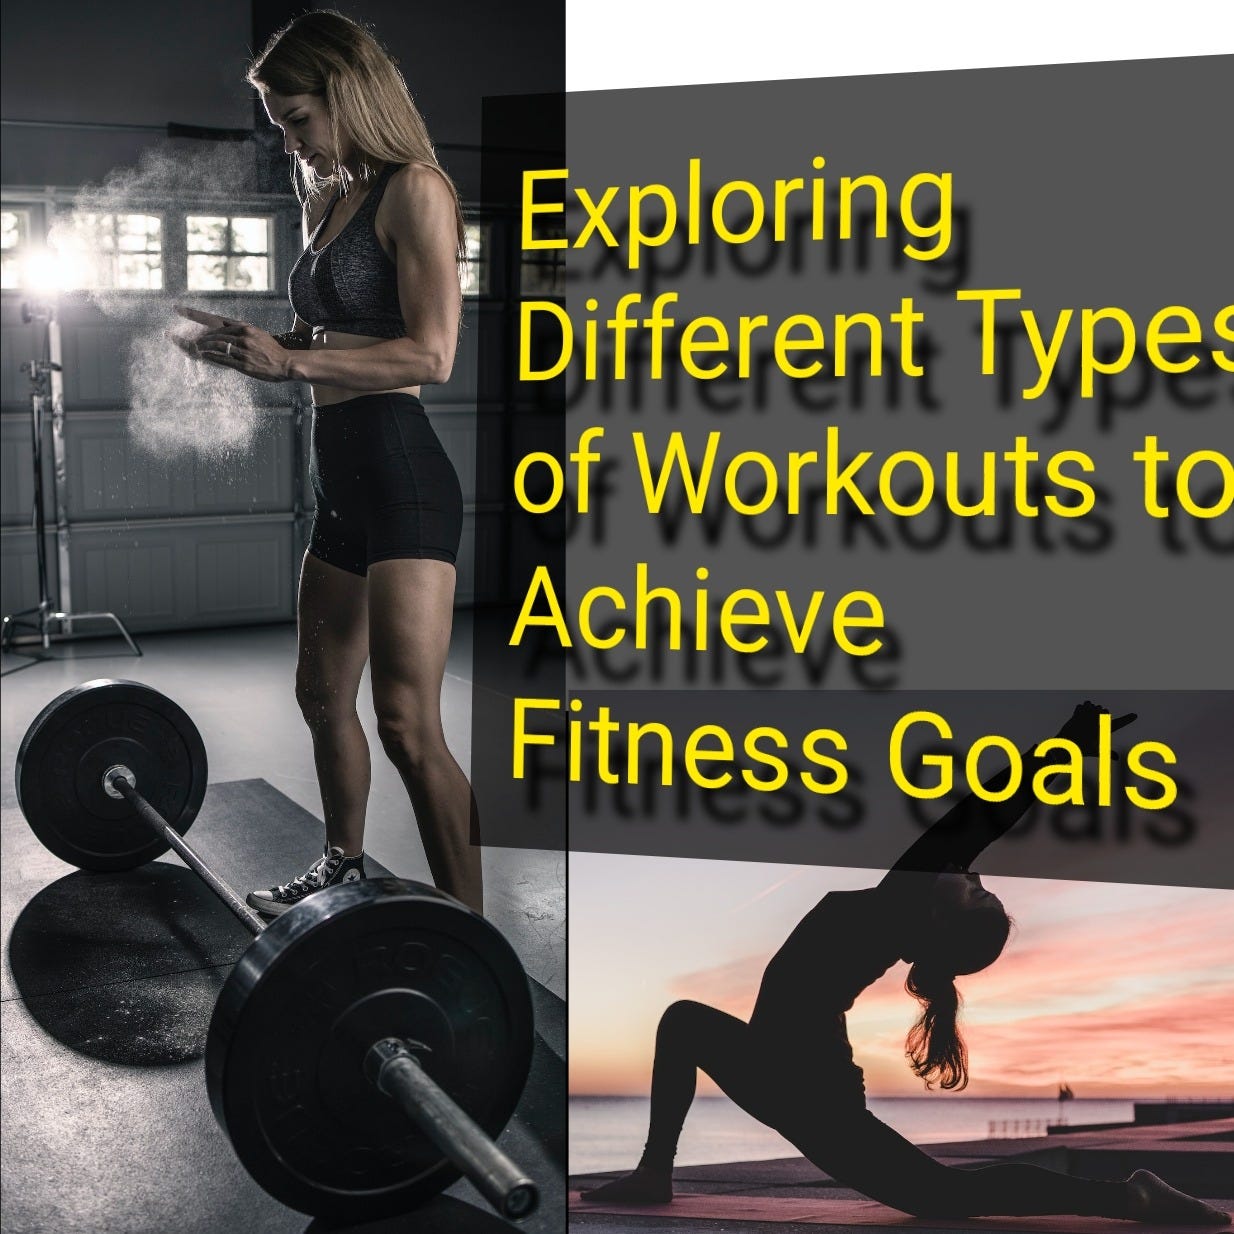 Exploring Different Types of Workouts to Achieve Fitness Goals